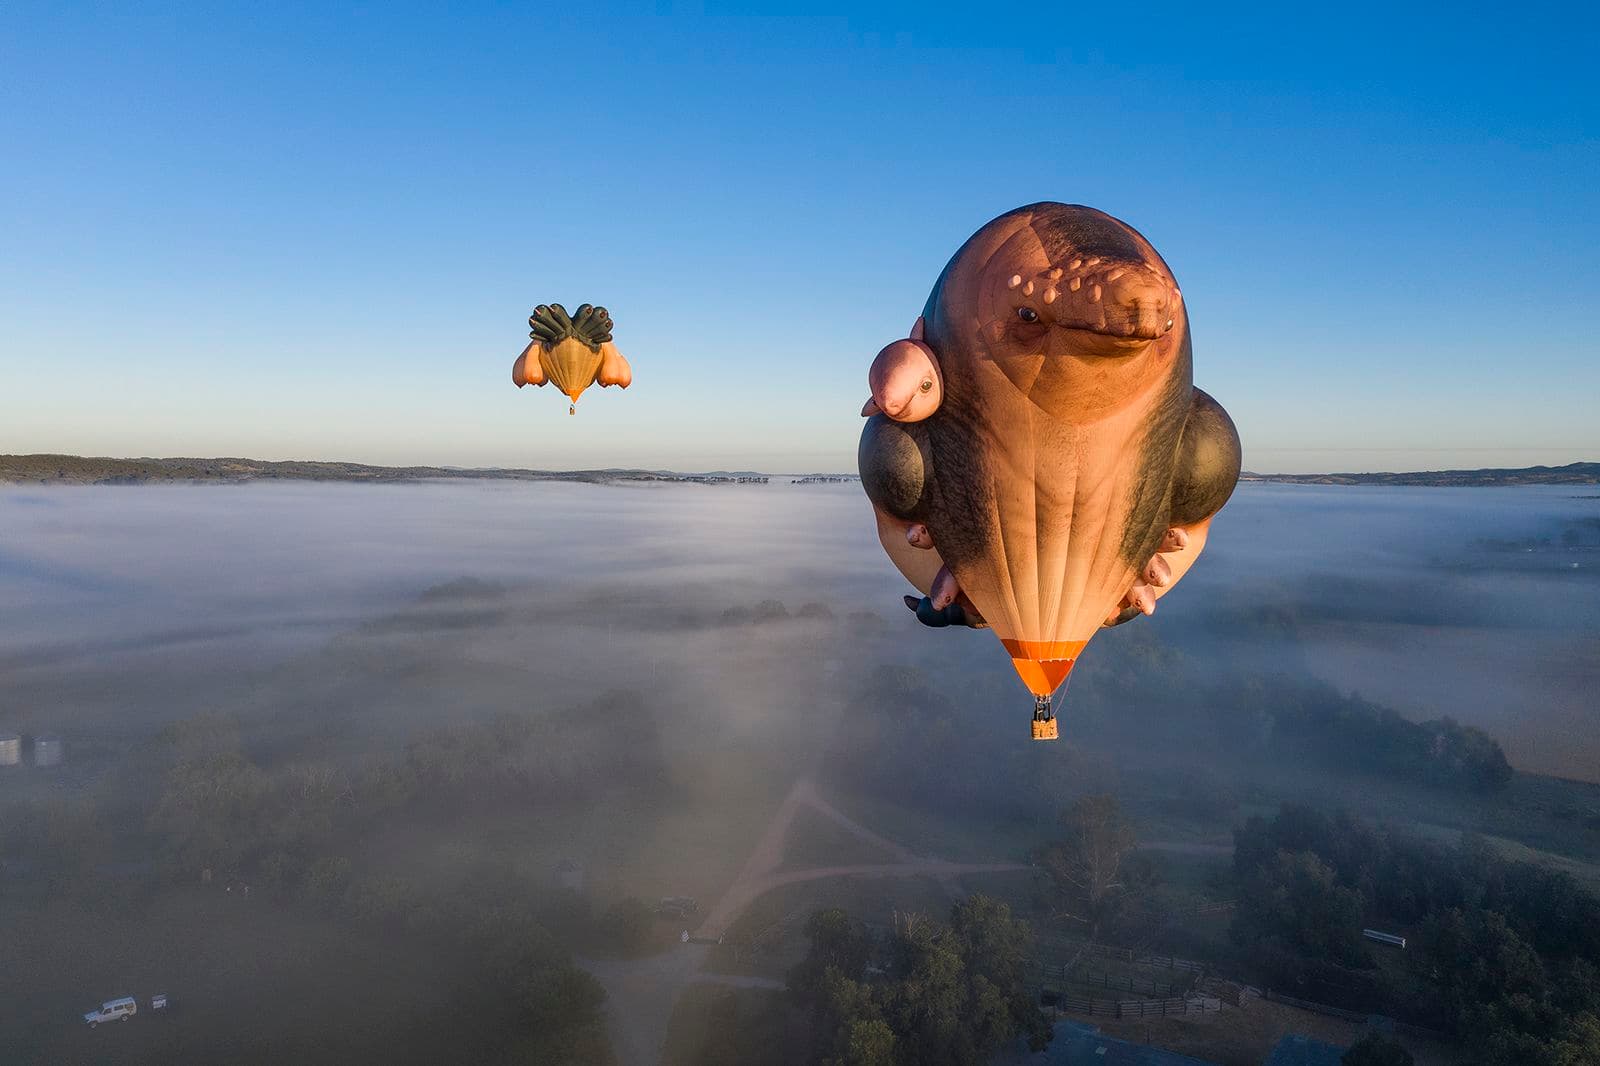 Hot air balloon, in the shape of a whale holding it's babies, floating in the sky